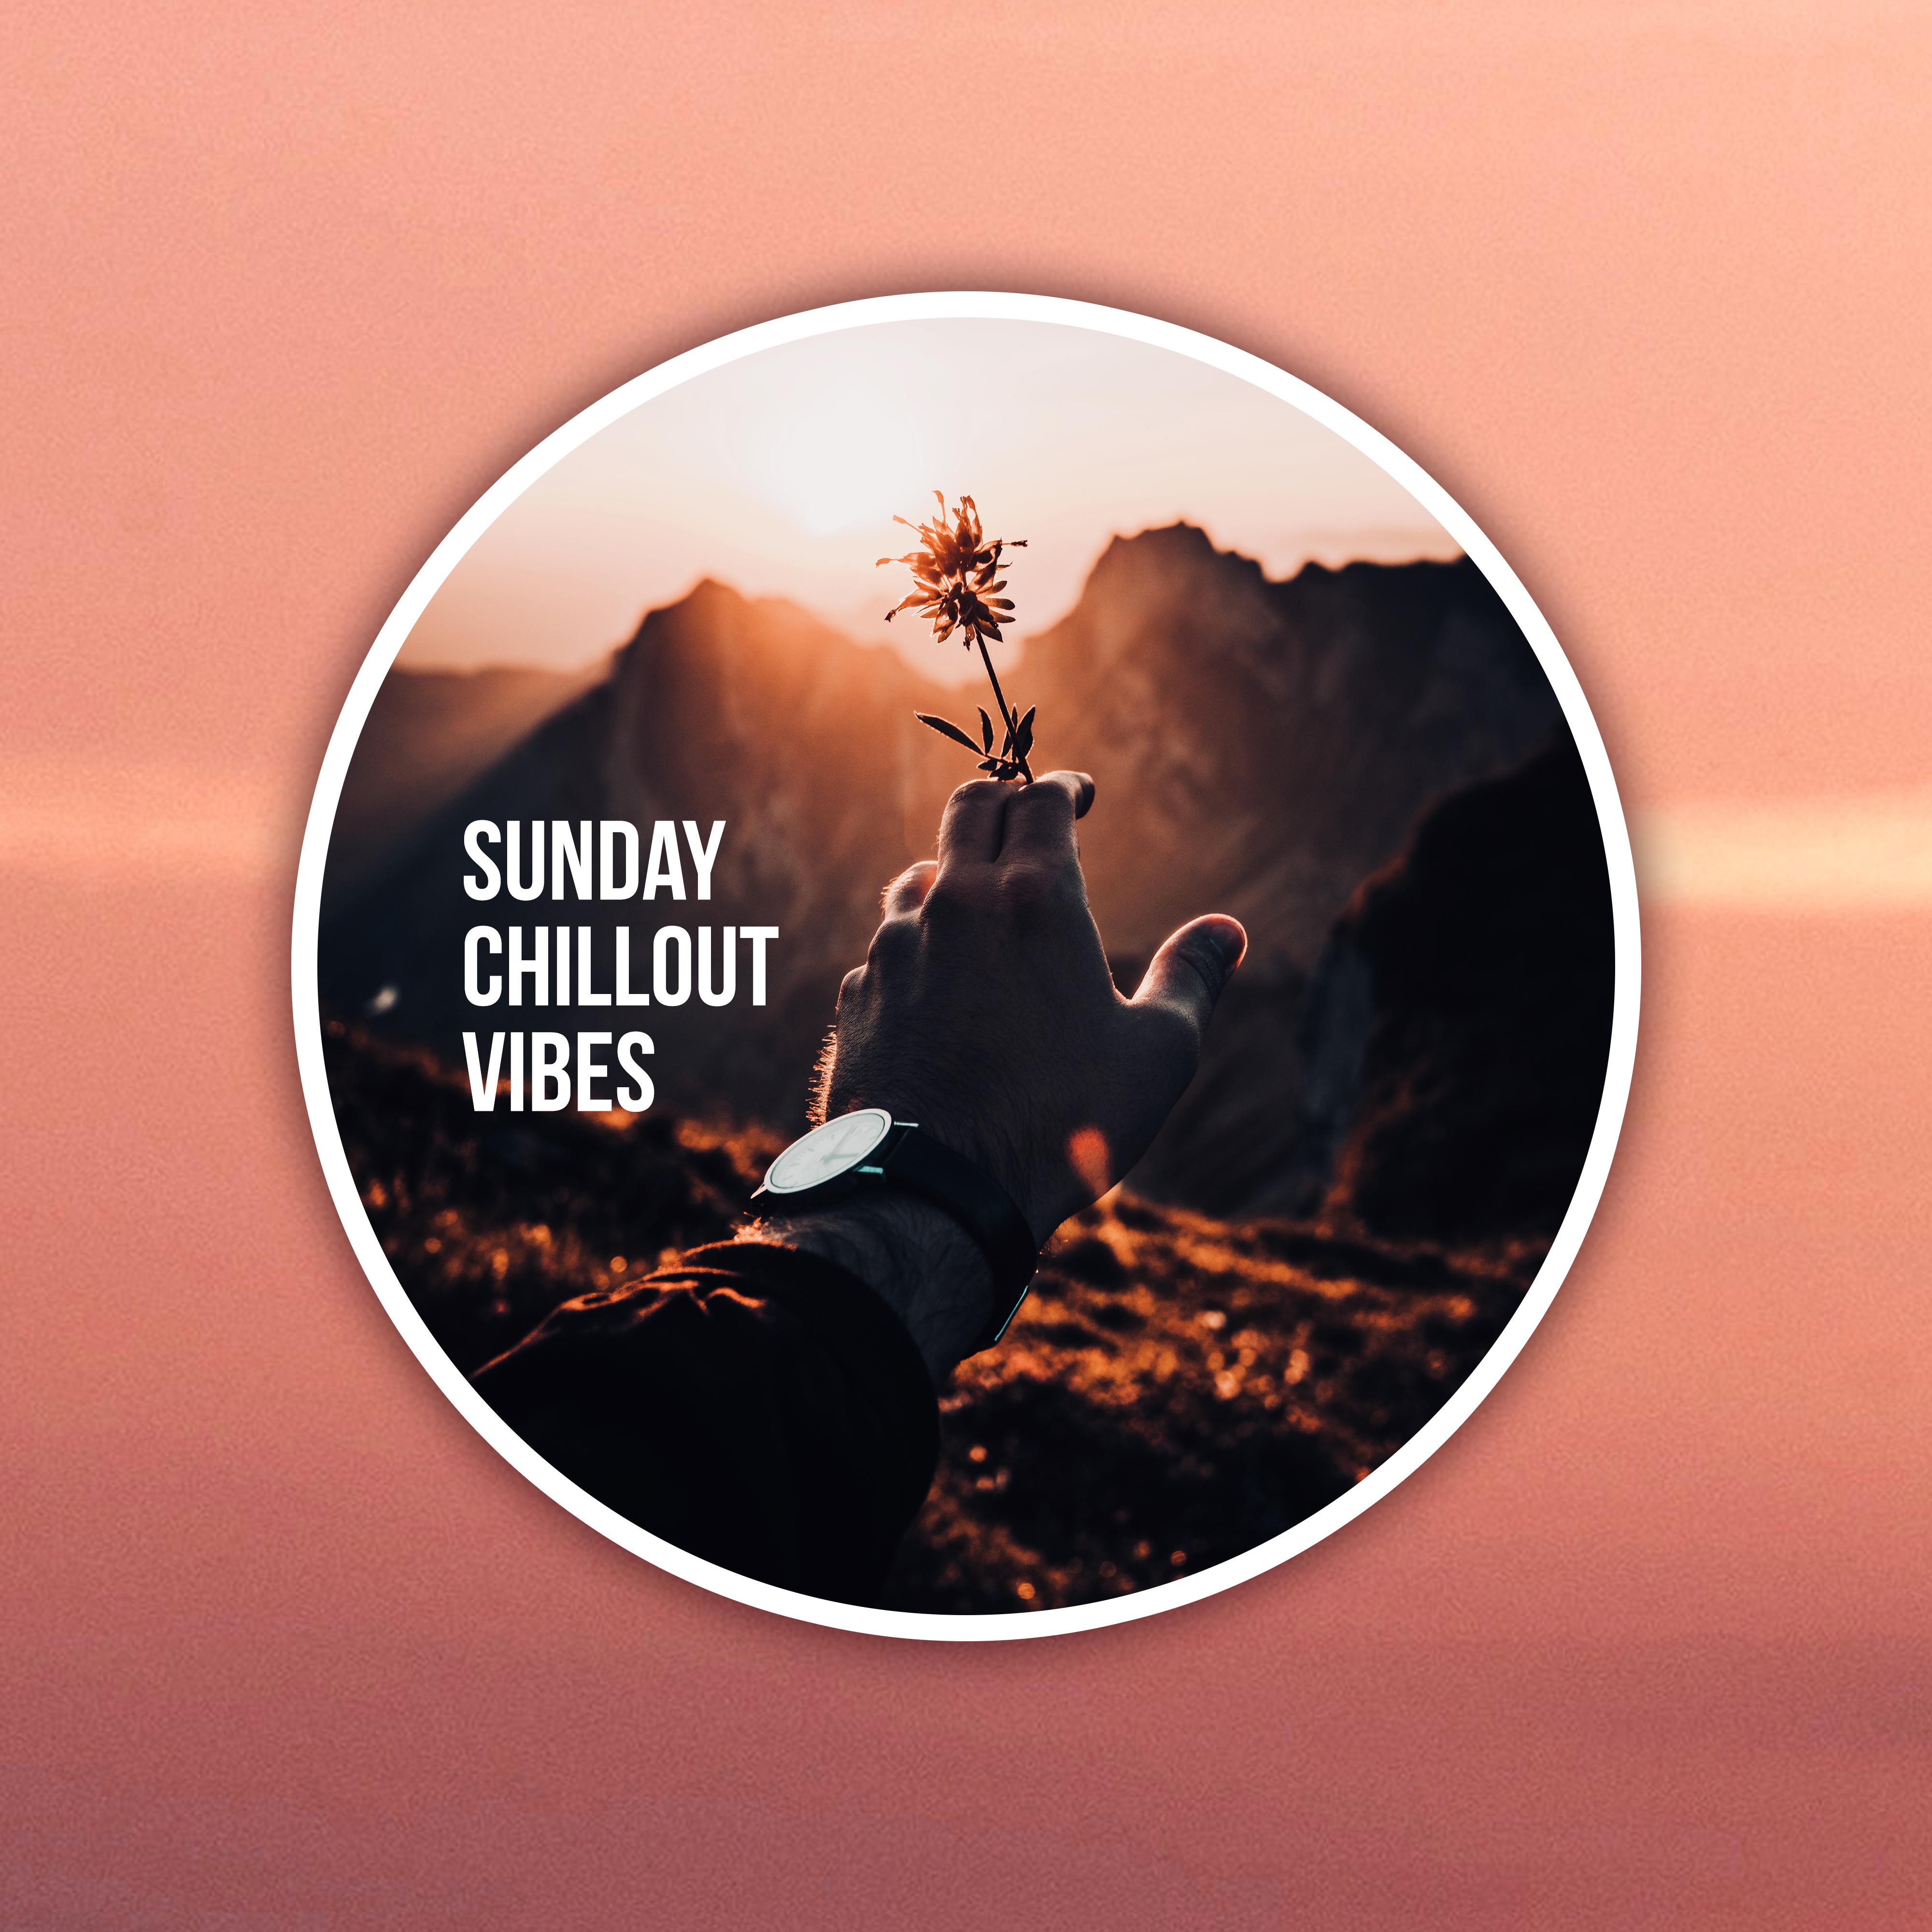 Sunday Chillout Vibes  Calming Songs for Relaxation, Weekend Deep Chillout, Pure Relaxation, Chillout Mix